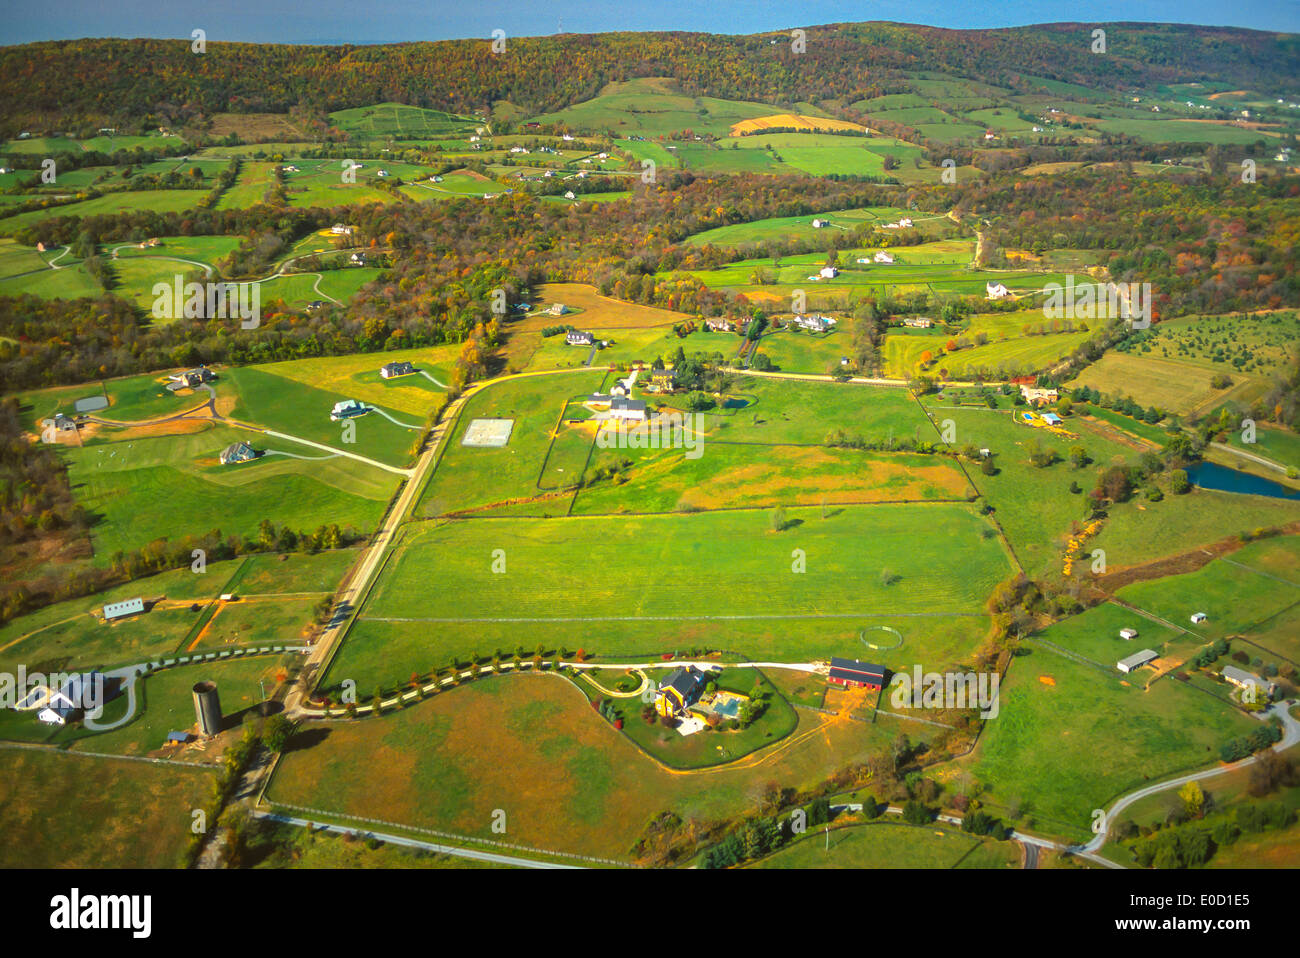 LOUDOUN COUNTY, VIRGINIA, USA - Aerial of homes on large plots with Blue Ridge mountains in distance. Stock Photo